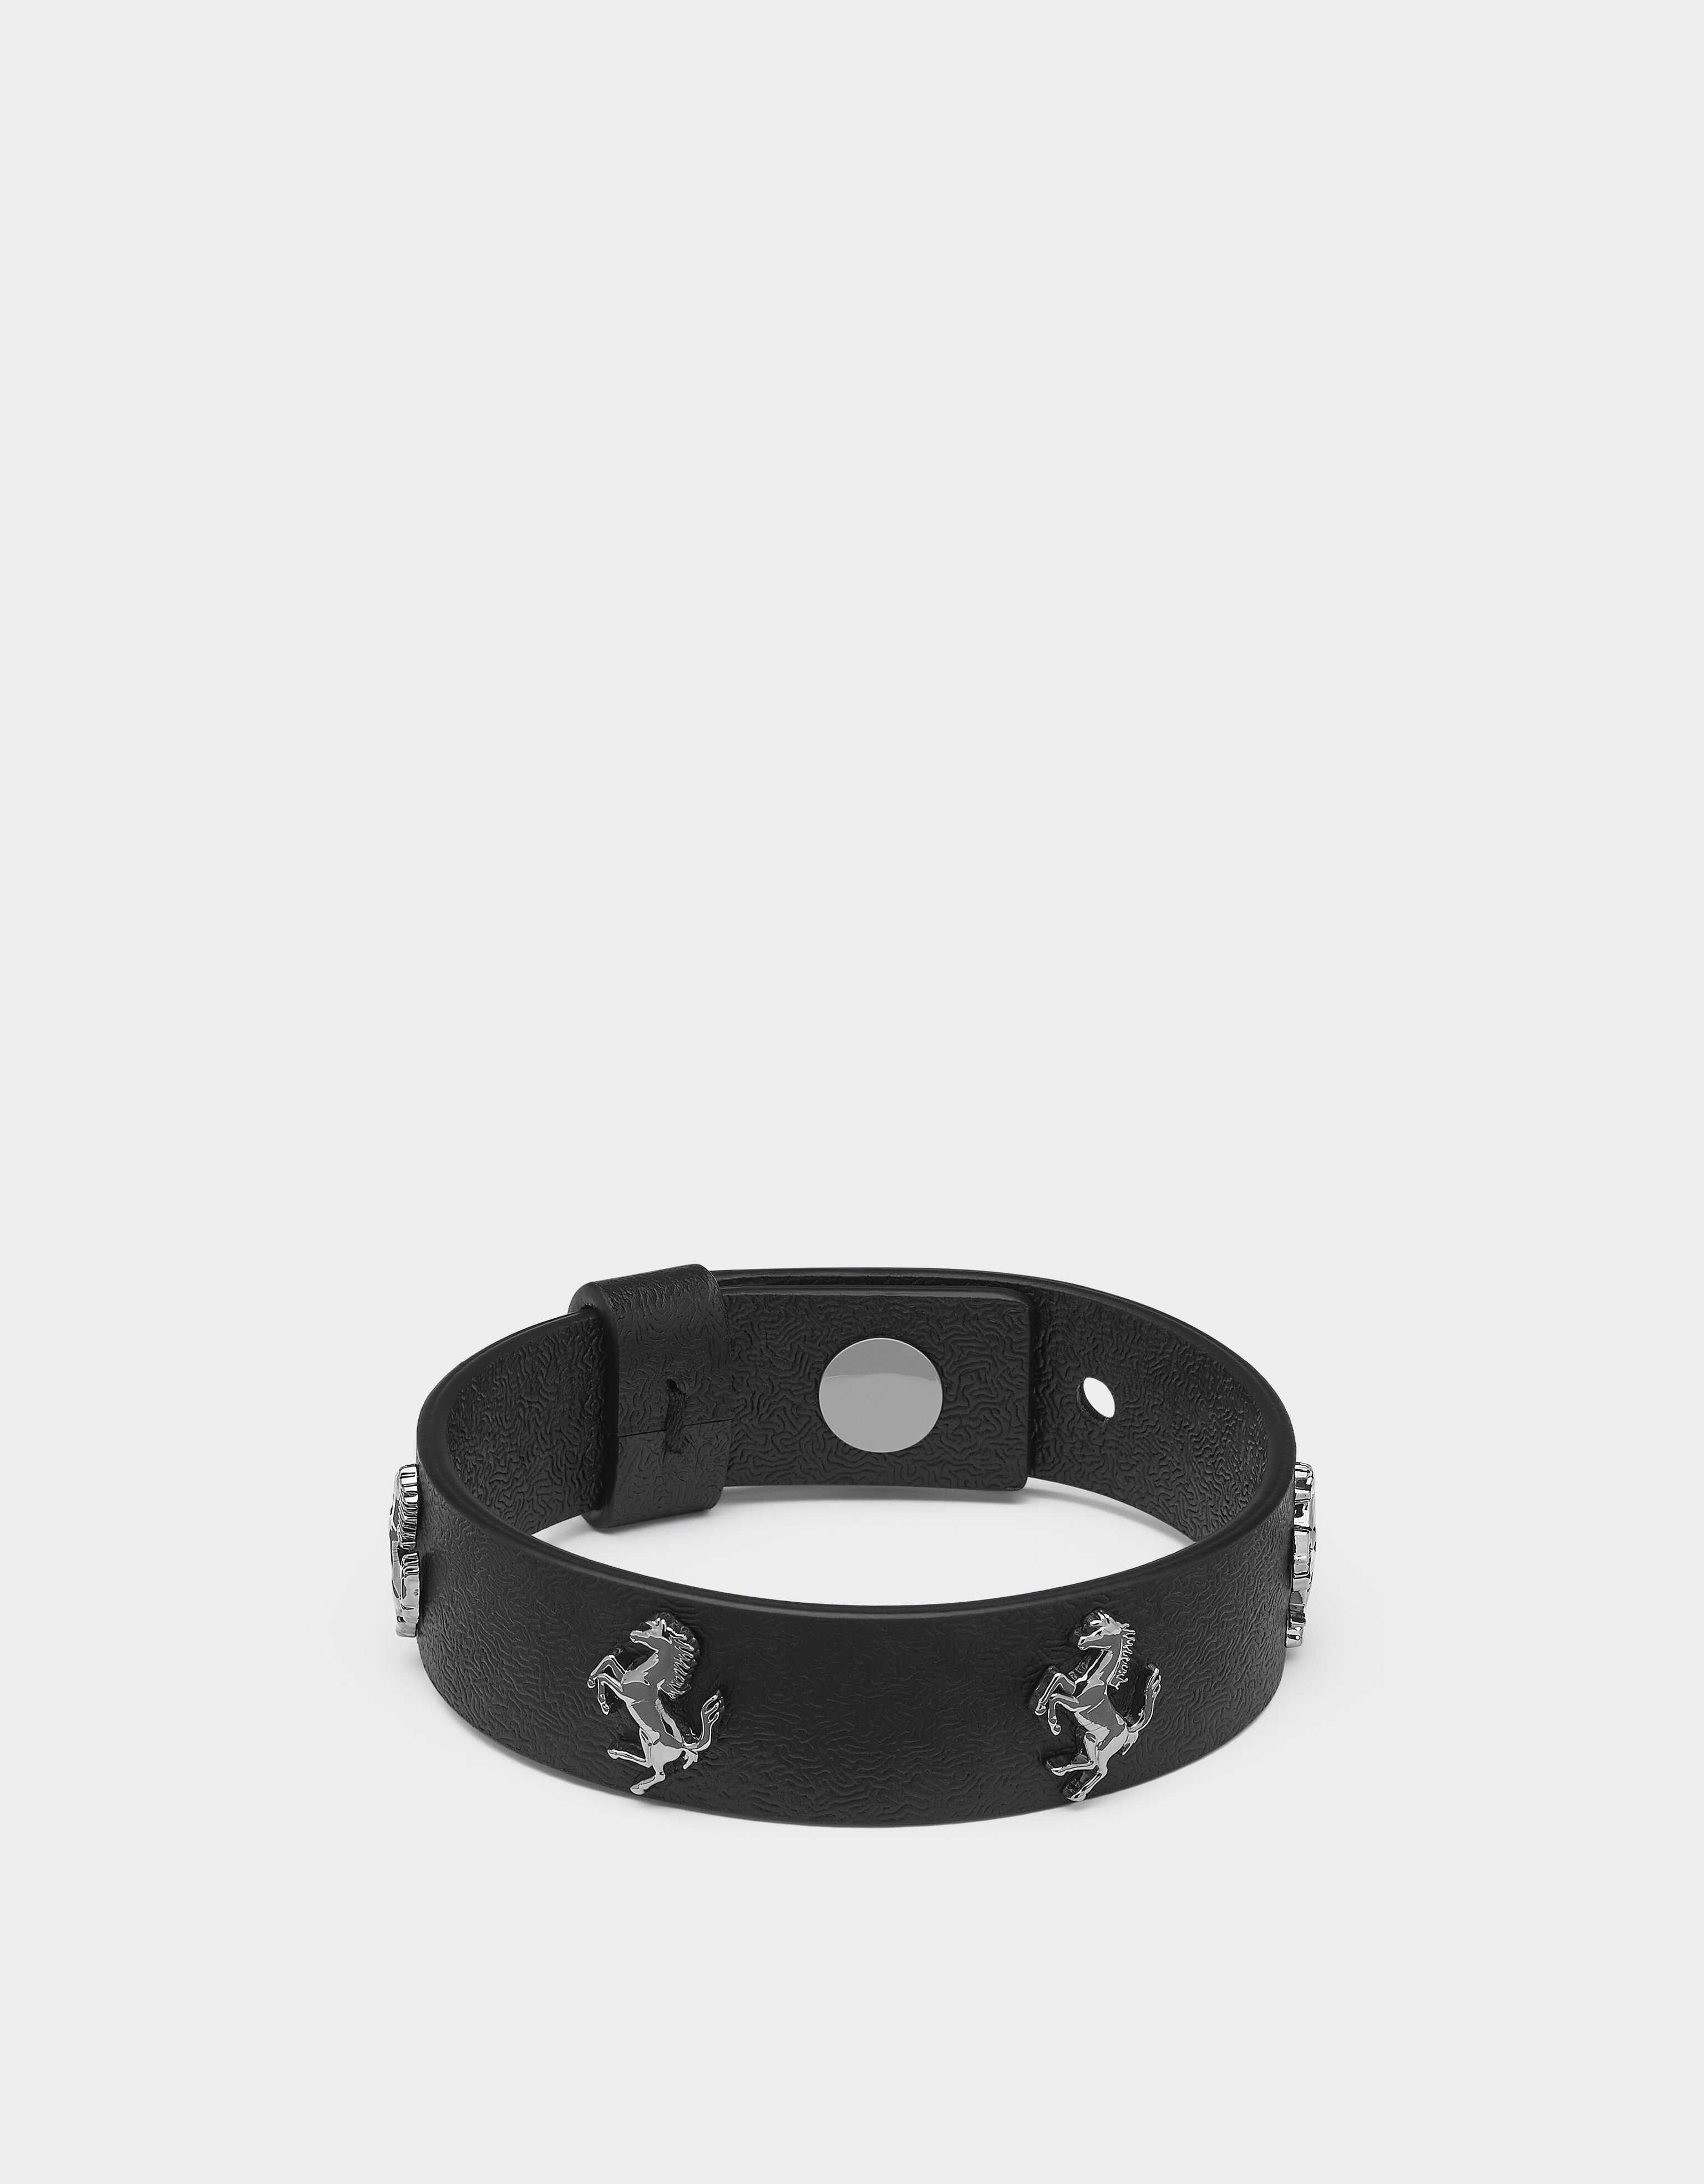 Ferrari Leather bracelet with metal studs featuring the Prancing Horse Charcoal 20014f